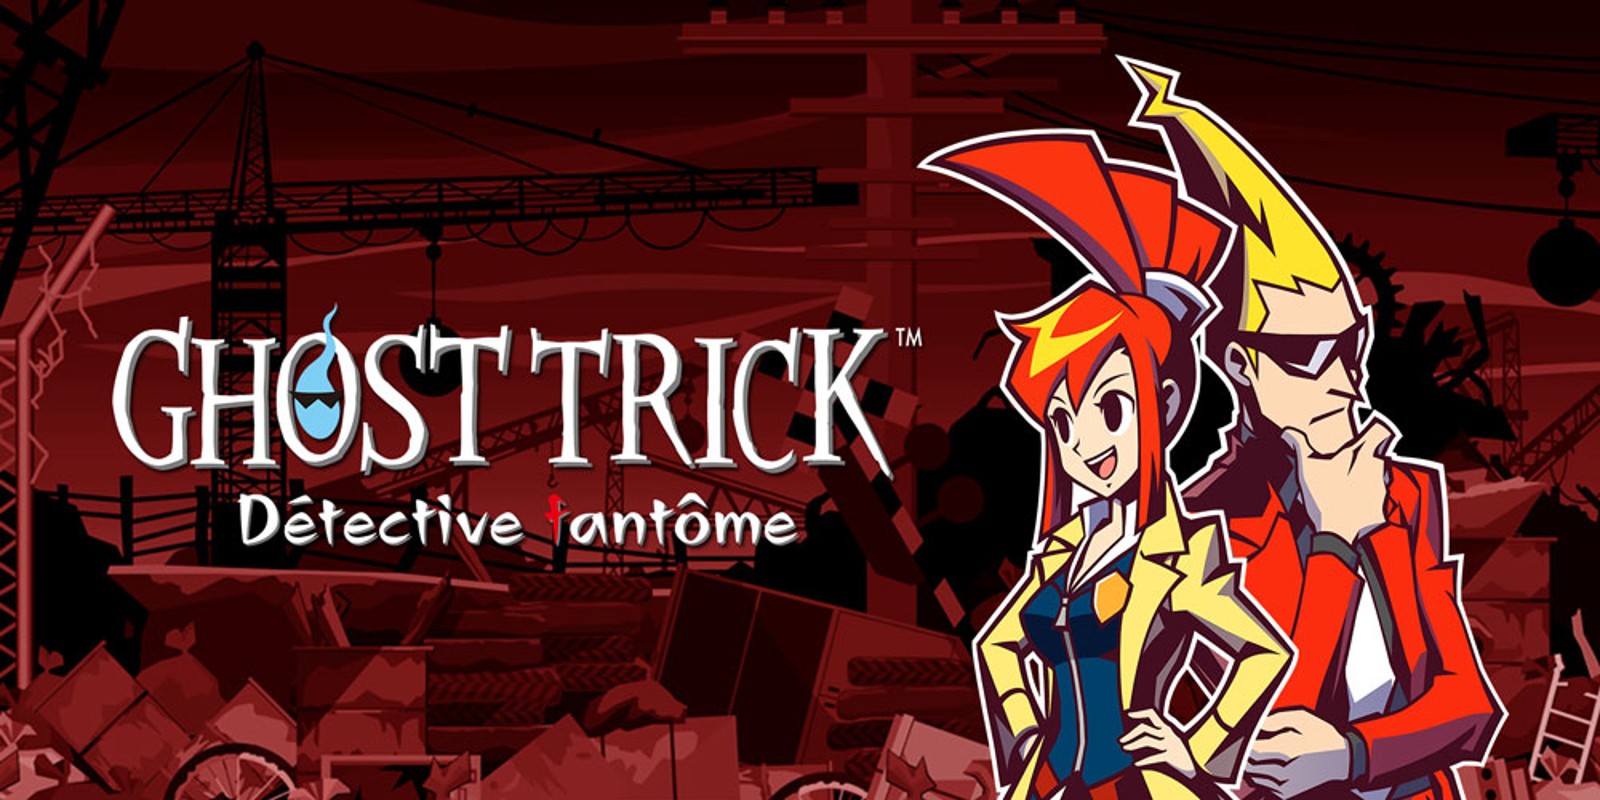 Mystery Visual Novel SI_NDS_GhostTrickPhantomDetective_frFR_image1600w